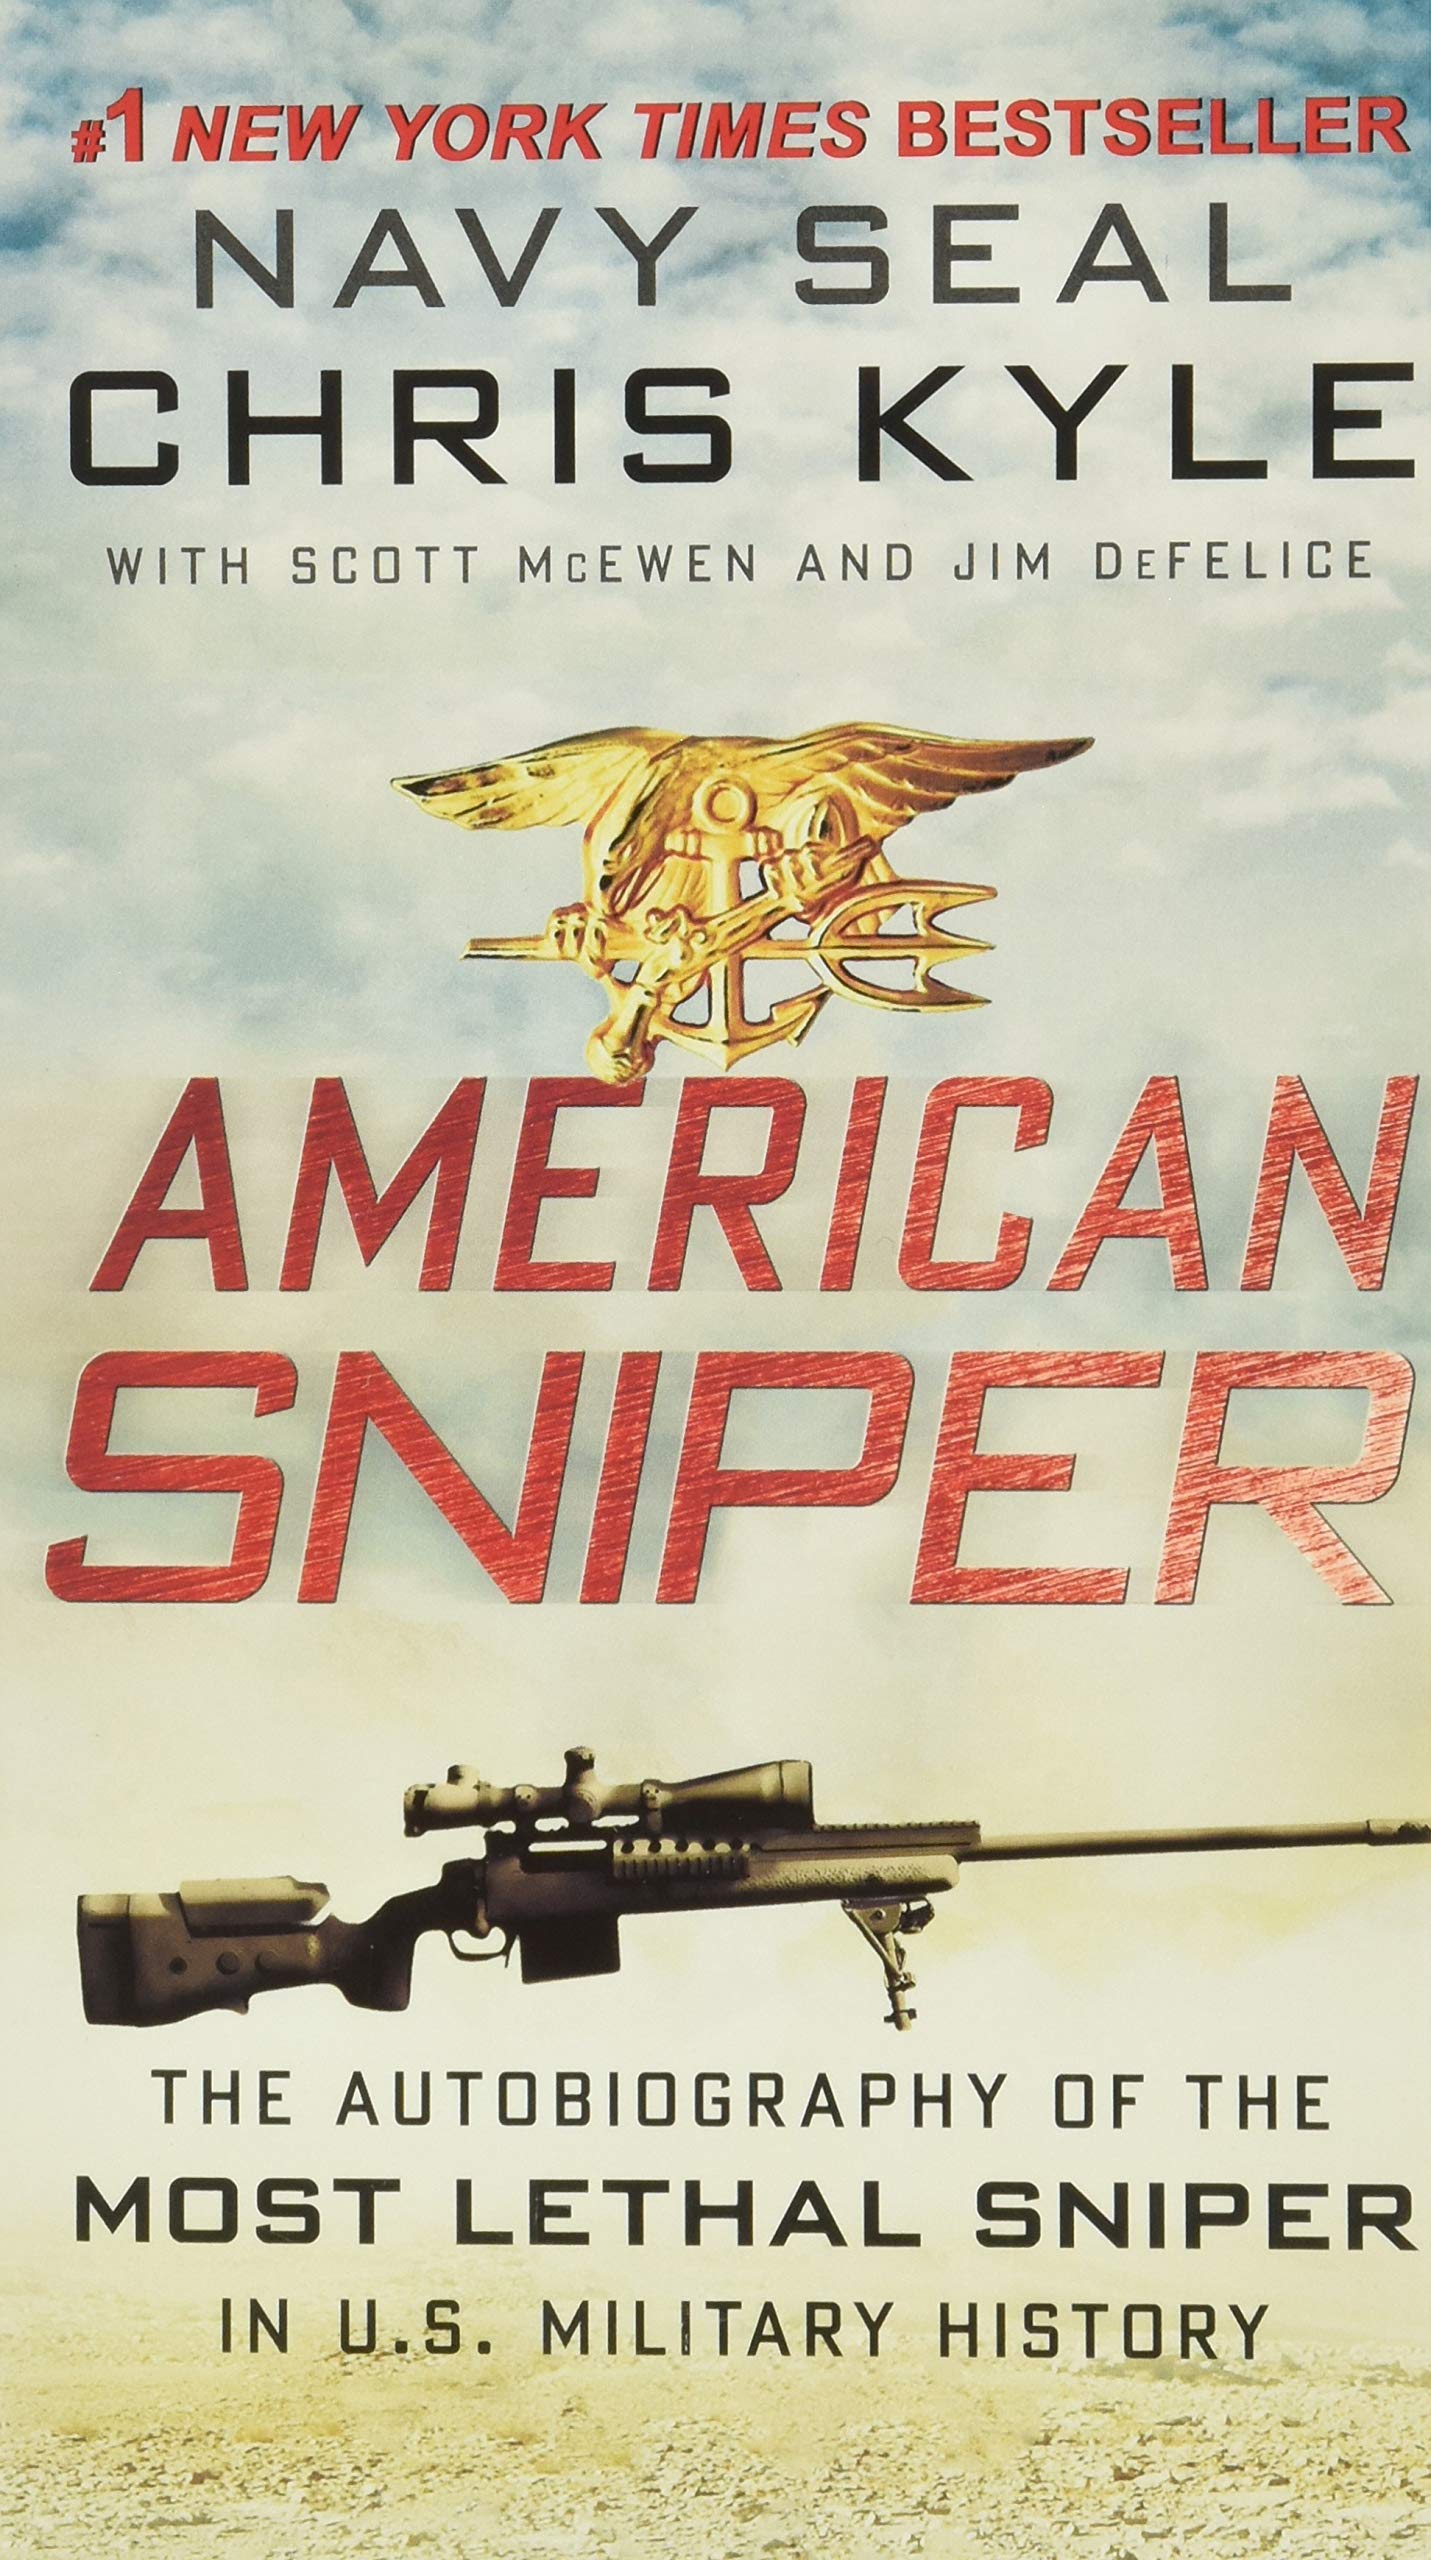 American Sniper: The Autobiography of the Most Lethal Sniper in U.S. Military History by Kyle, Chris